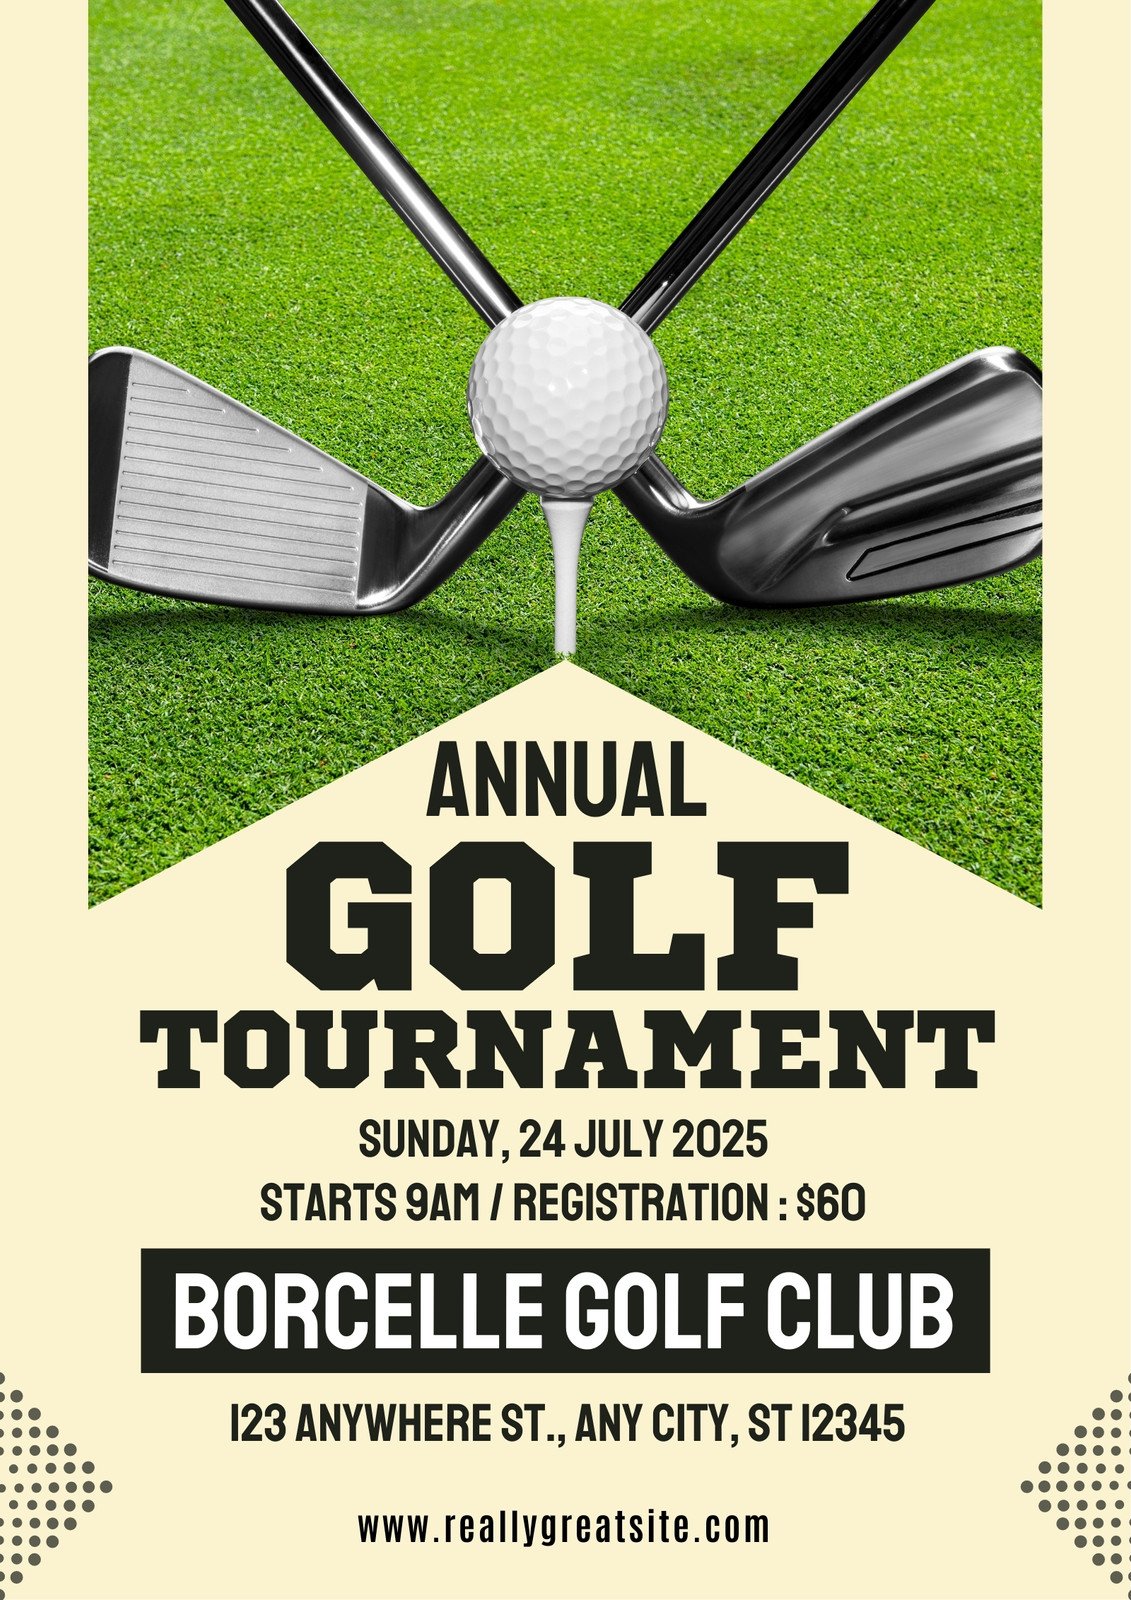 Charity Golf Tournament Poster Template and Ideas for Design